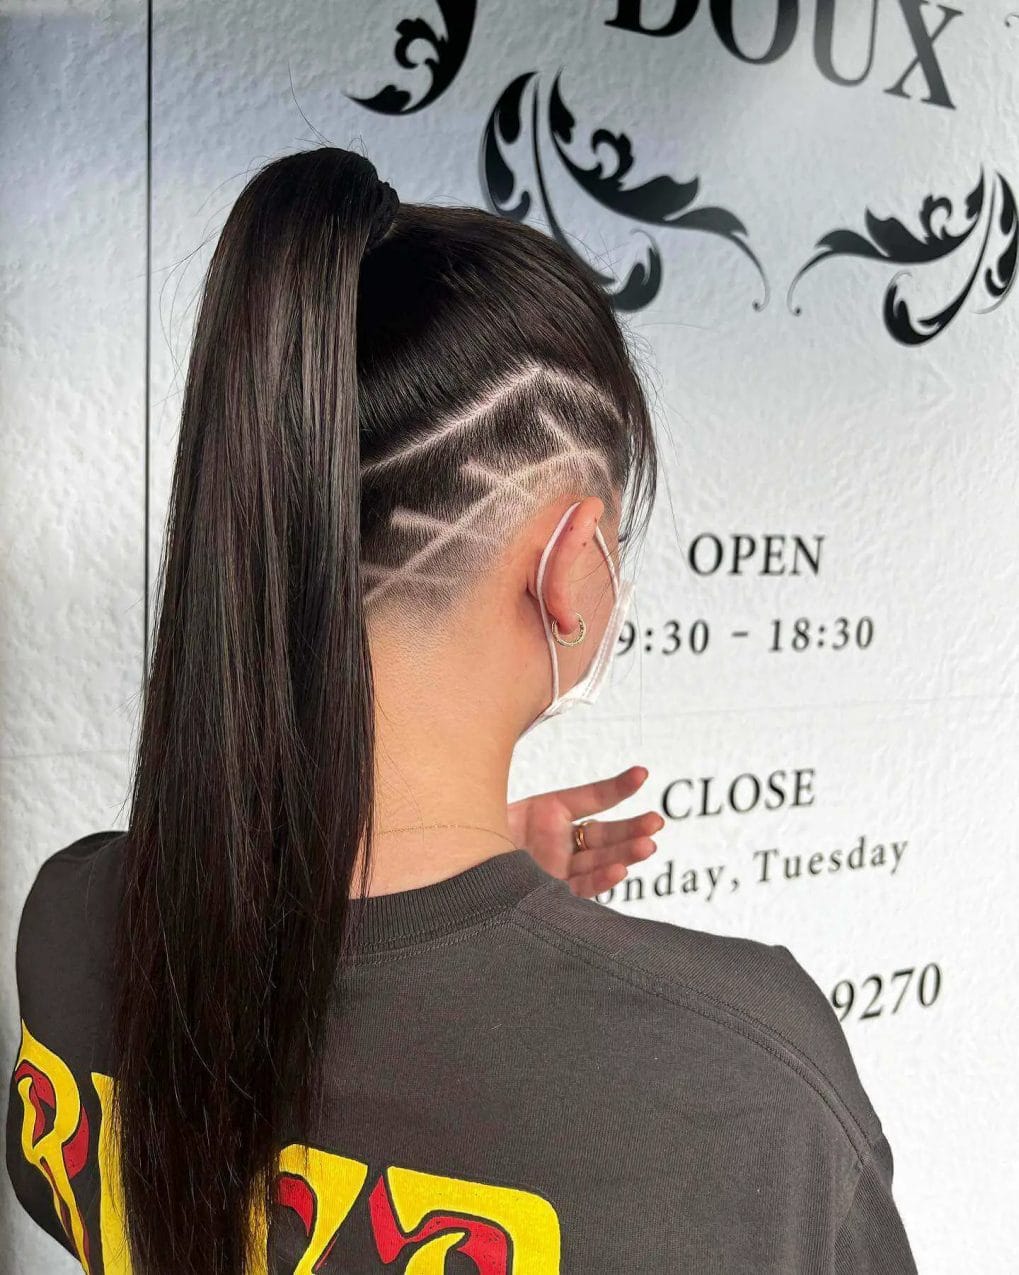 A smooth high ponytail with a neatly designed line pattern undercut.